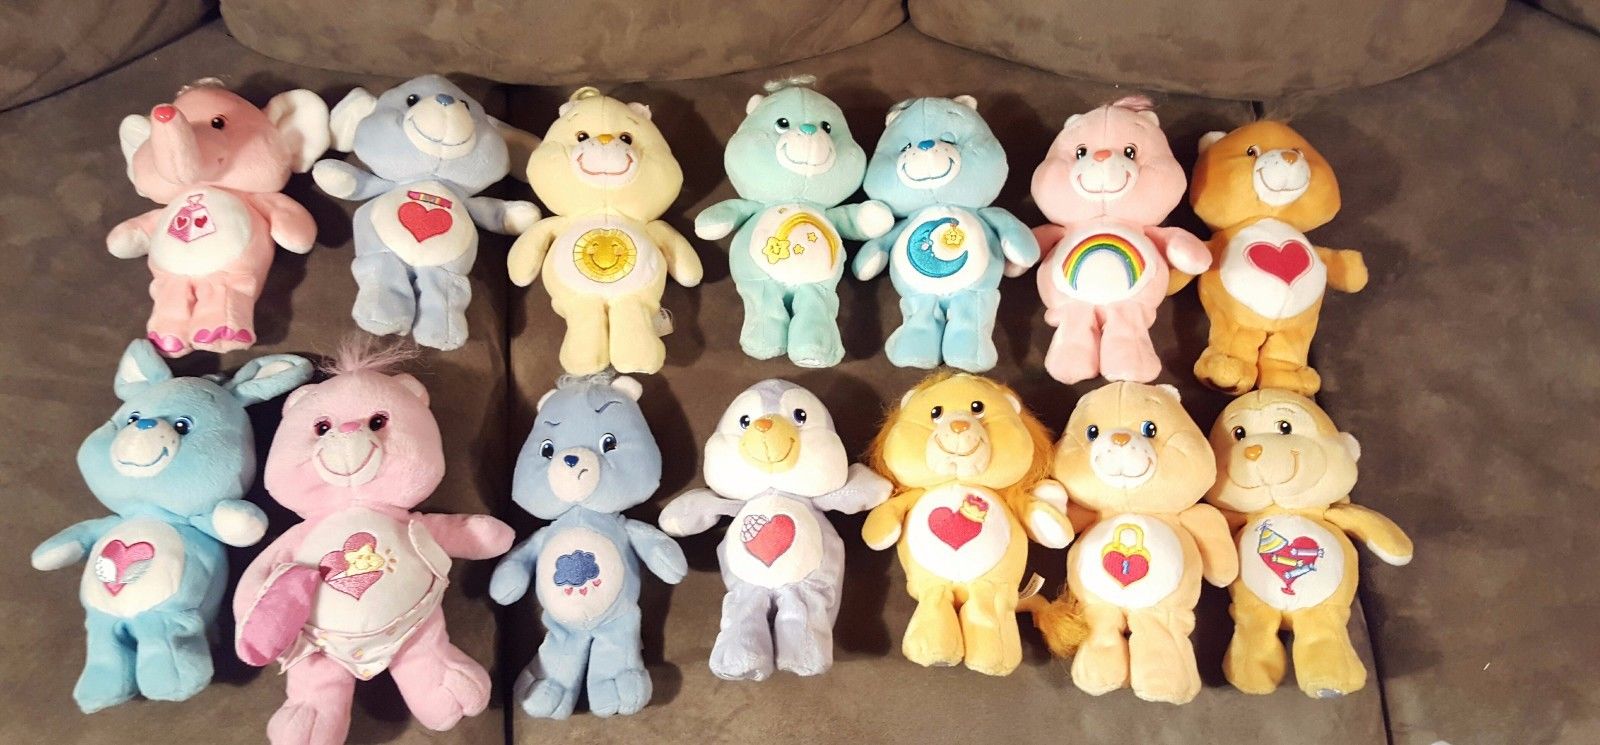 Beautiful Plush 40 piece New Care Bear Collection 2002-2007 mostly 2002.